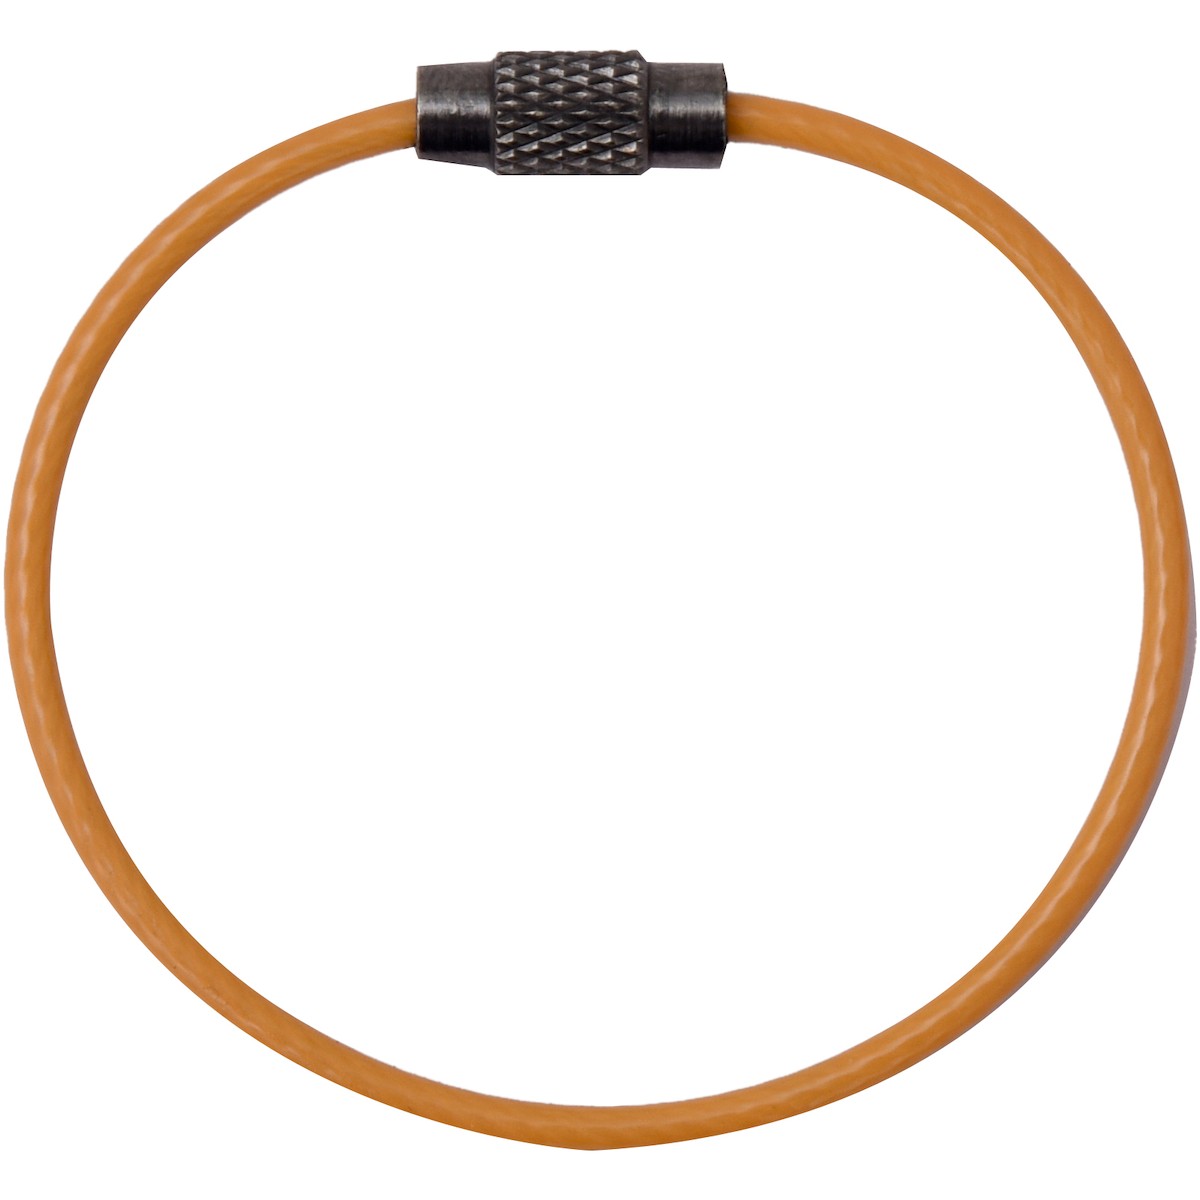 PIP® Wire Sling with Screw Gate - 3 lbs. maximum load limit  (#533-100802)